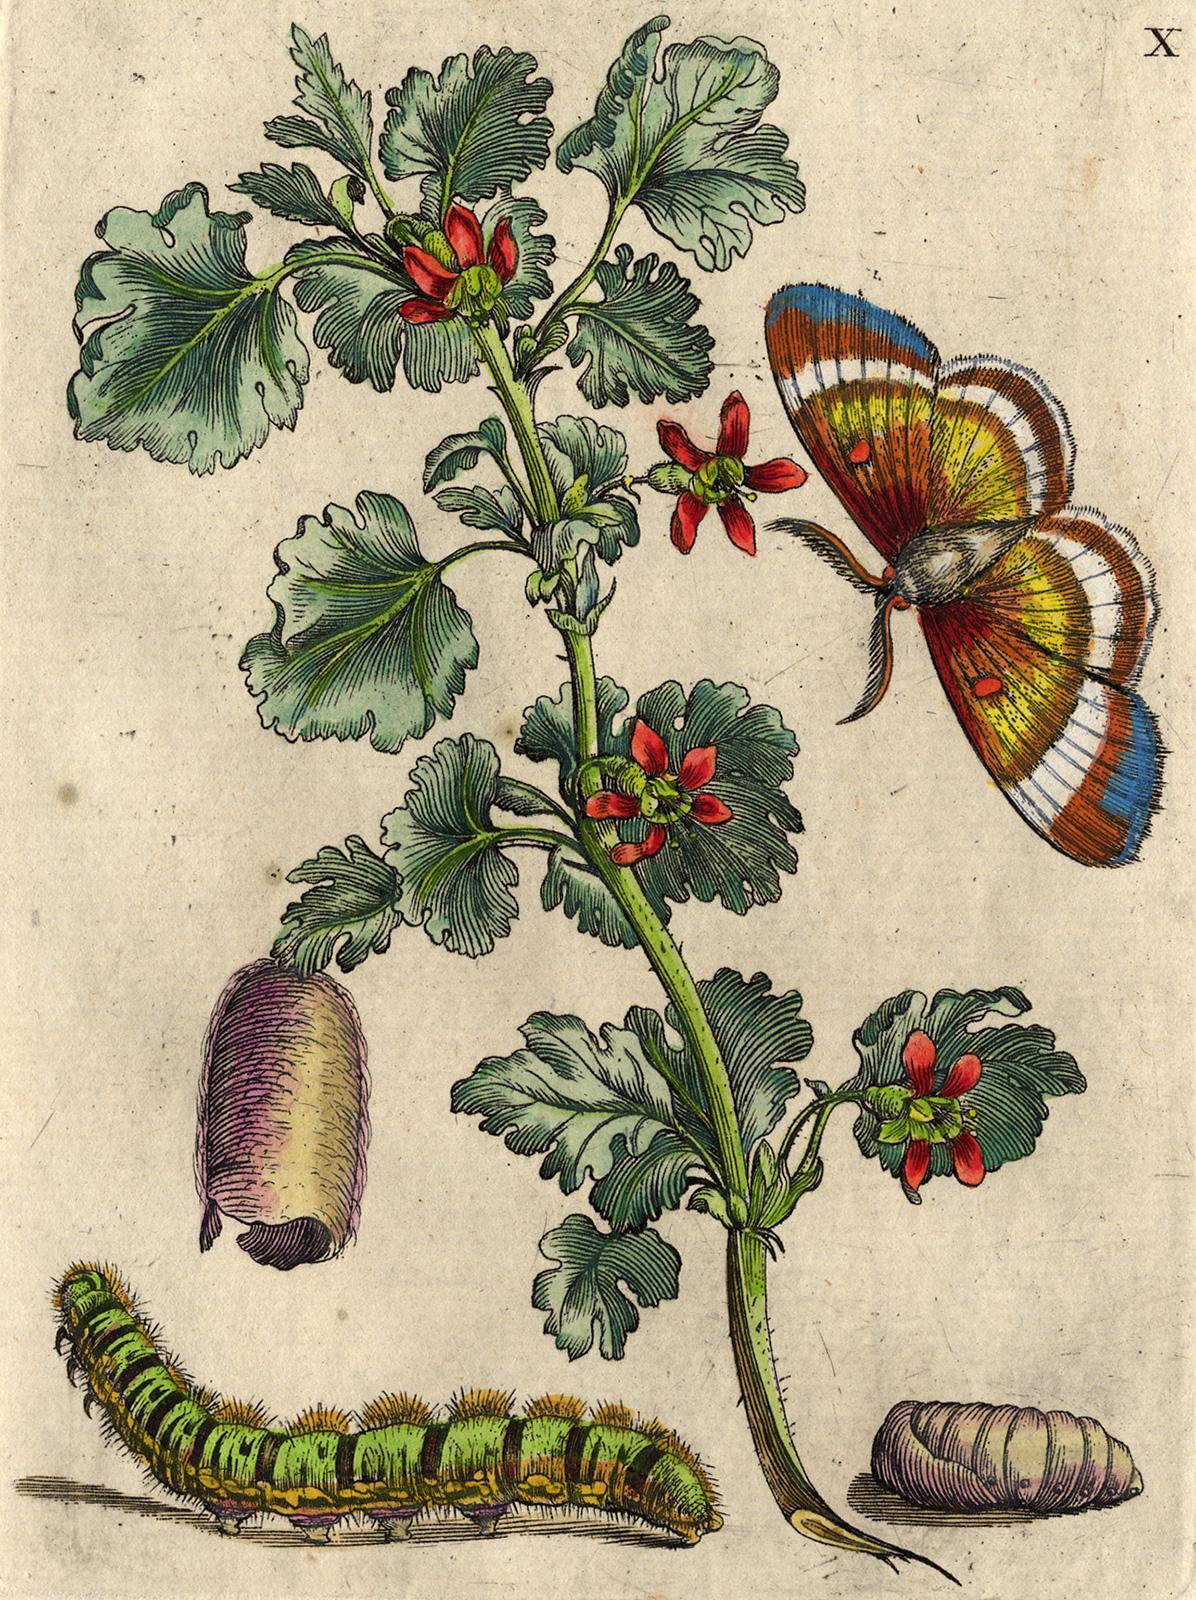 Gooseberry blossom and insects by Merian - Handcoloured engraving - 18th century - Print by Maria Sybilla Merian